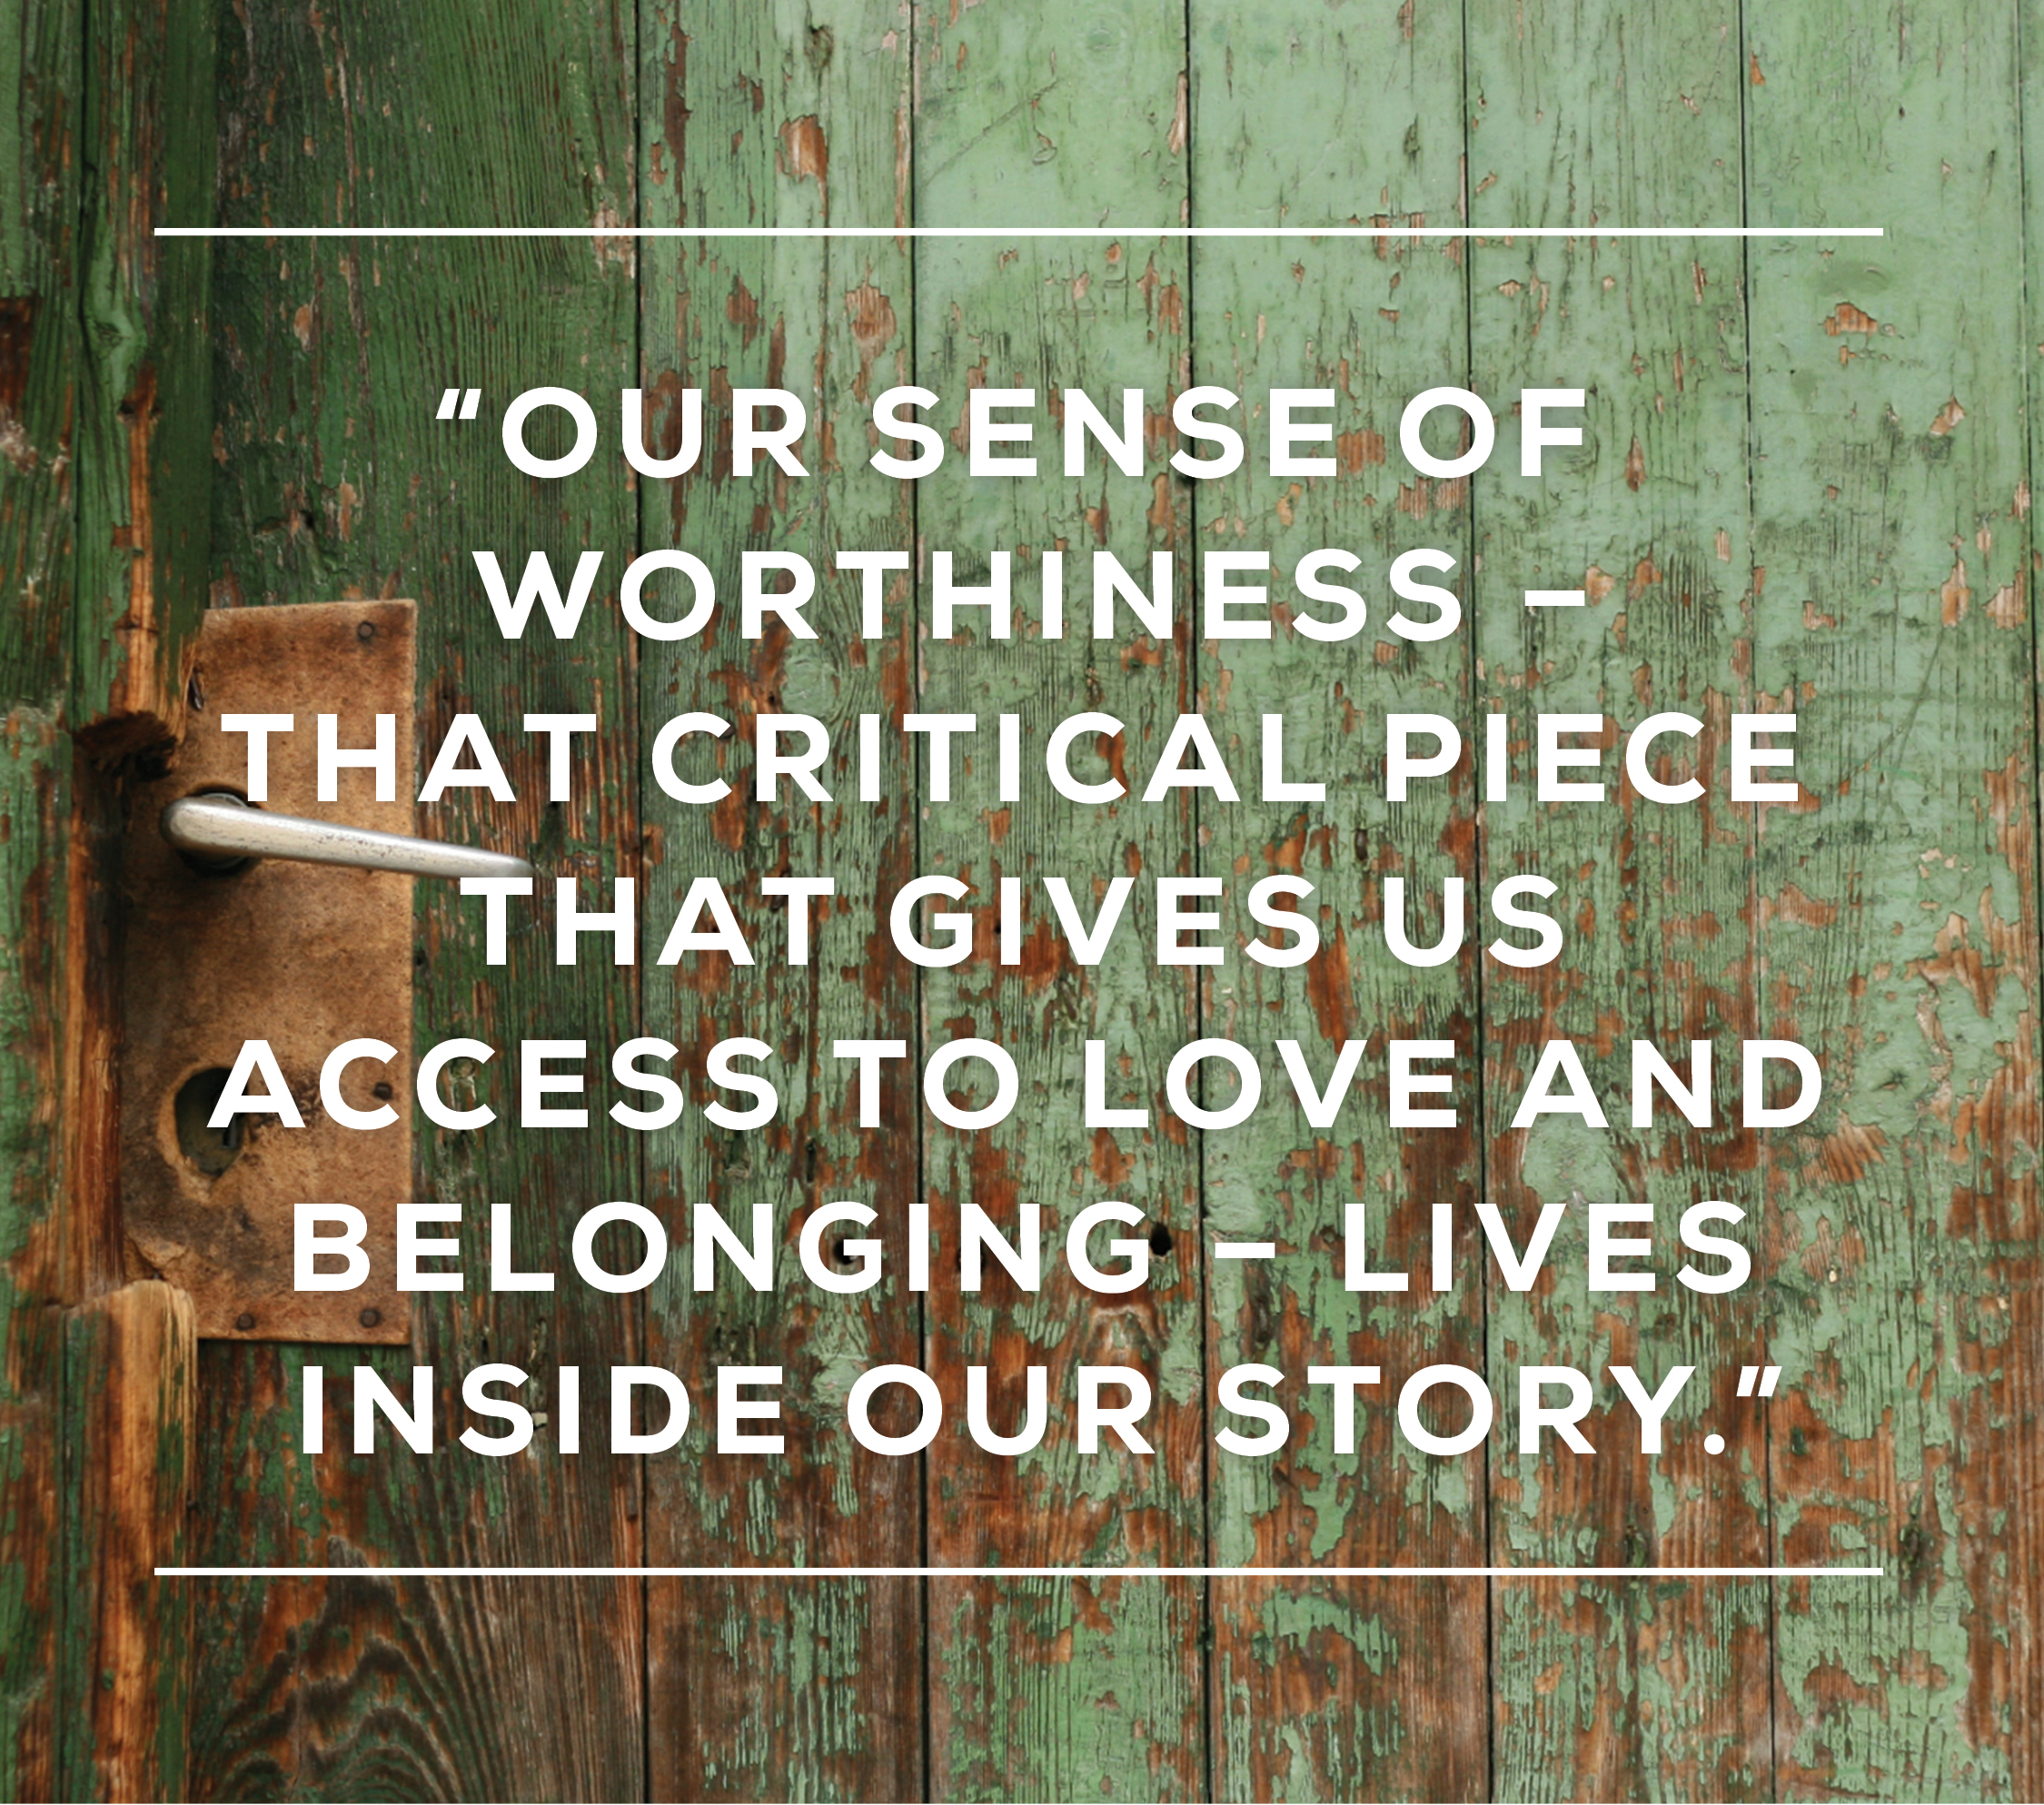 Quote by Brene Brown that states, "Our sense of worthiness that critical piece that gives us access to love and belonging lives inside our story.